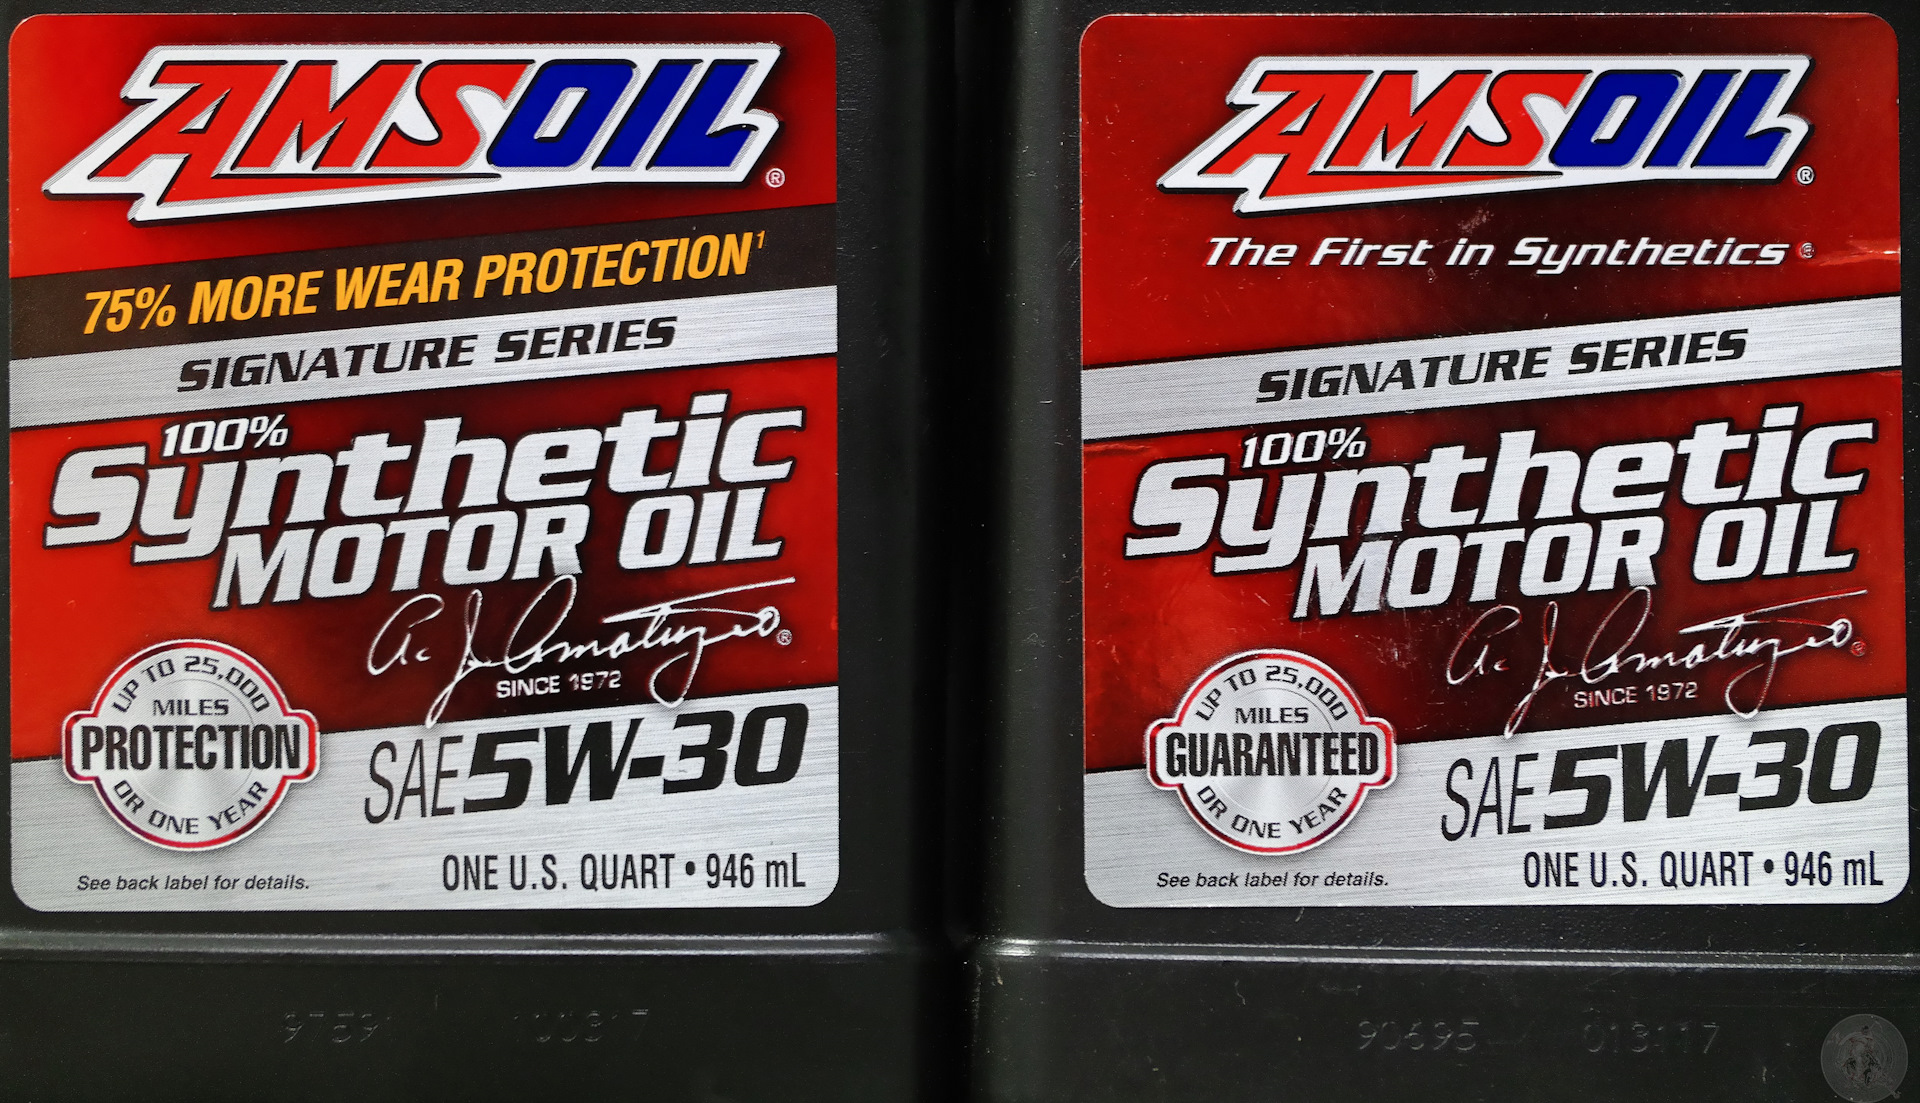 Amsoil signature series synthetic. AMSOIL Signature Series 5w-30 артикул. AMSOIL Signature Series Synthetic Motor Oil 5w-30. Аmsoil Signature Series 100% Synthetic 5w-30. AMSOIL Signature Series 100% Synthetic 5w30 (asl1g),.